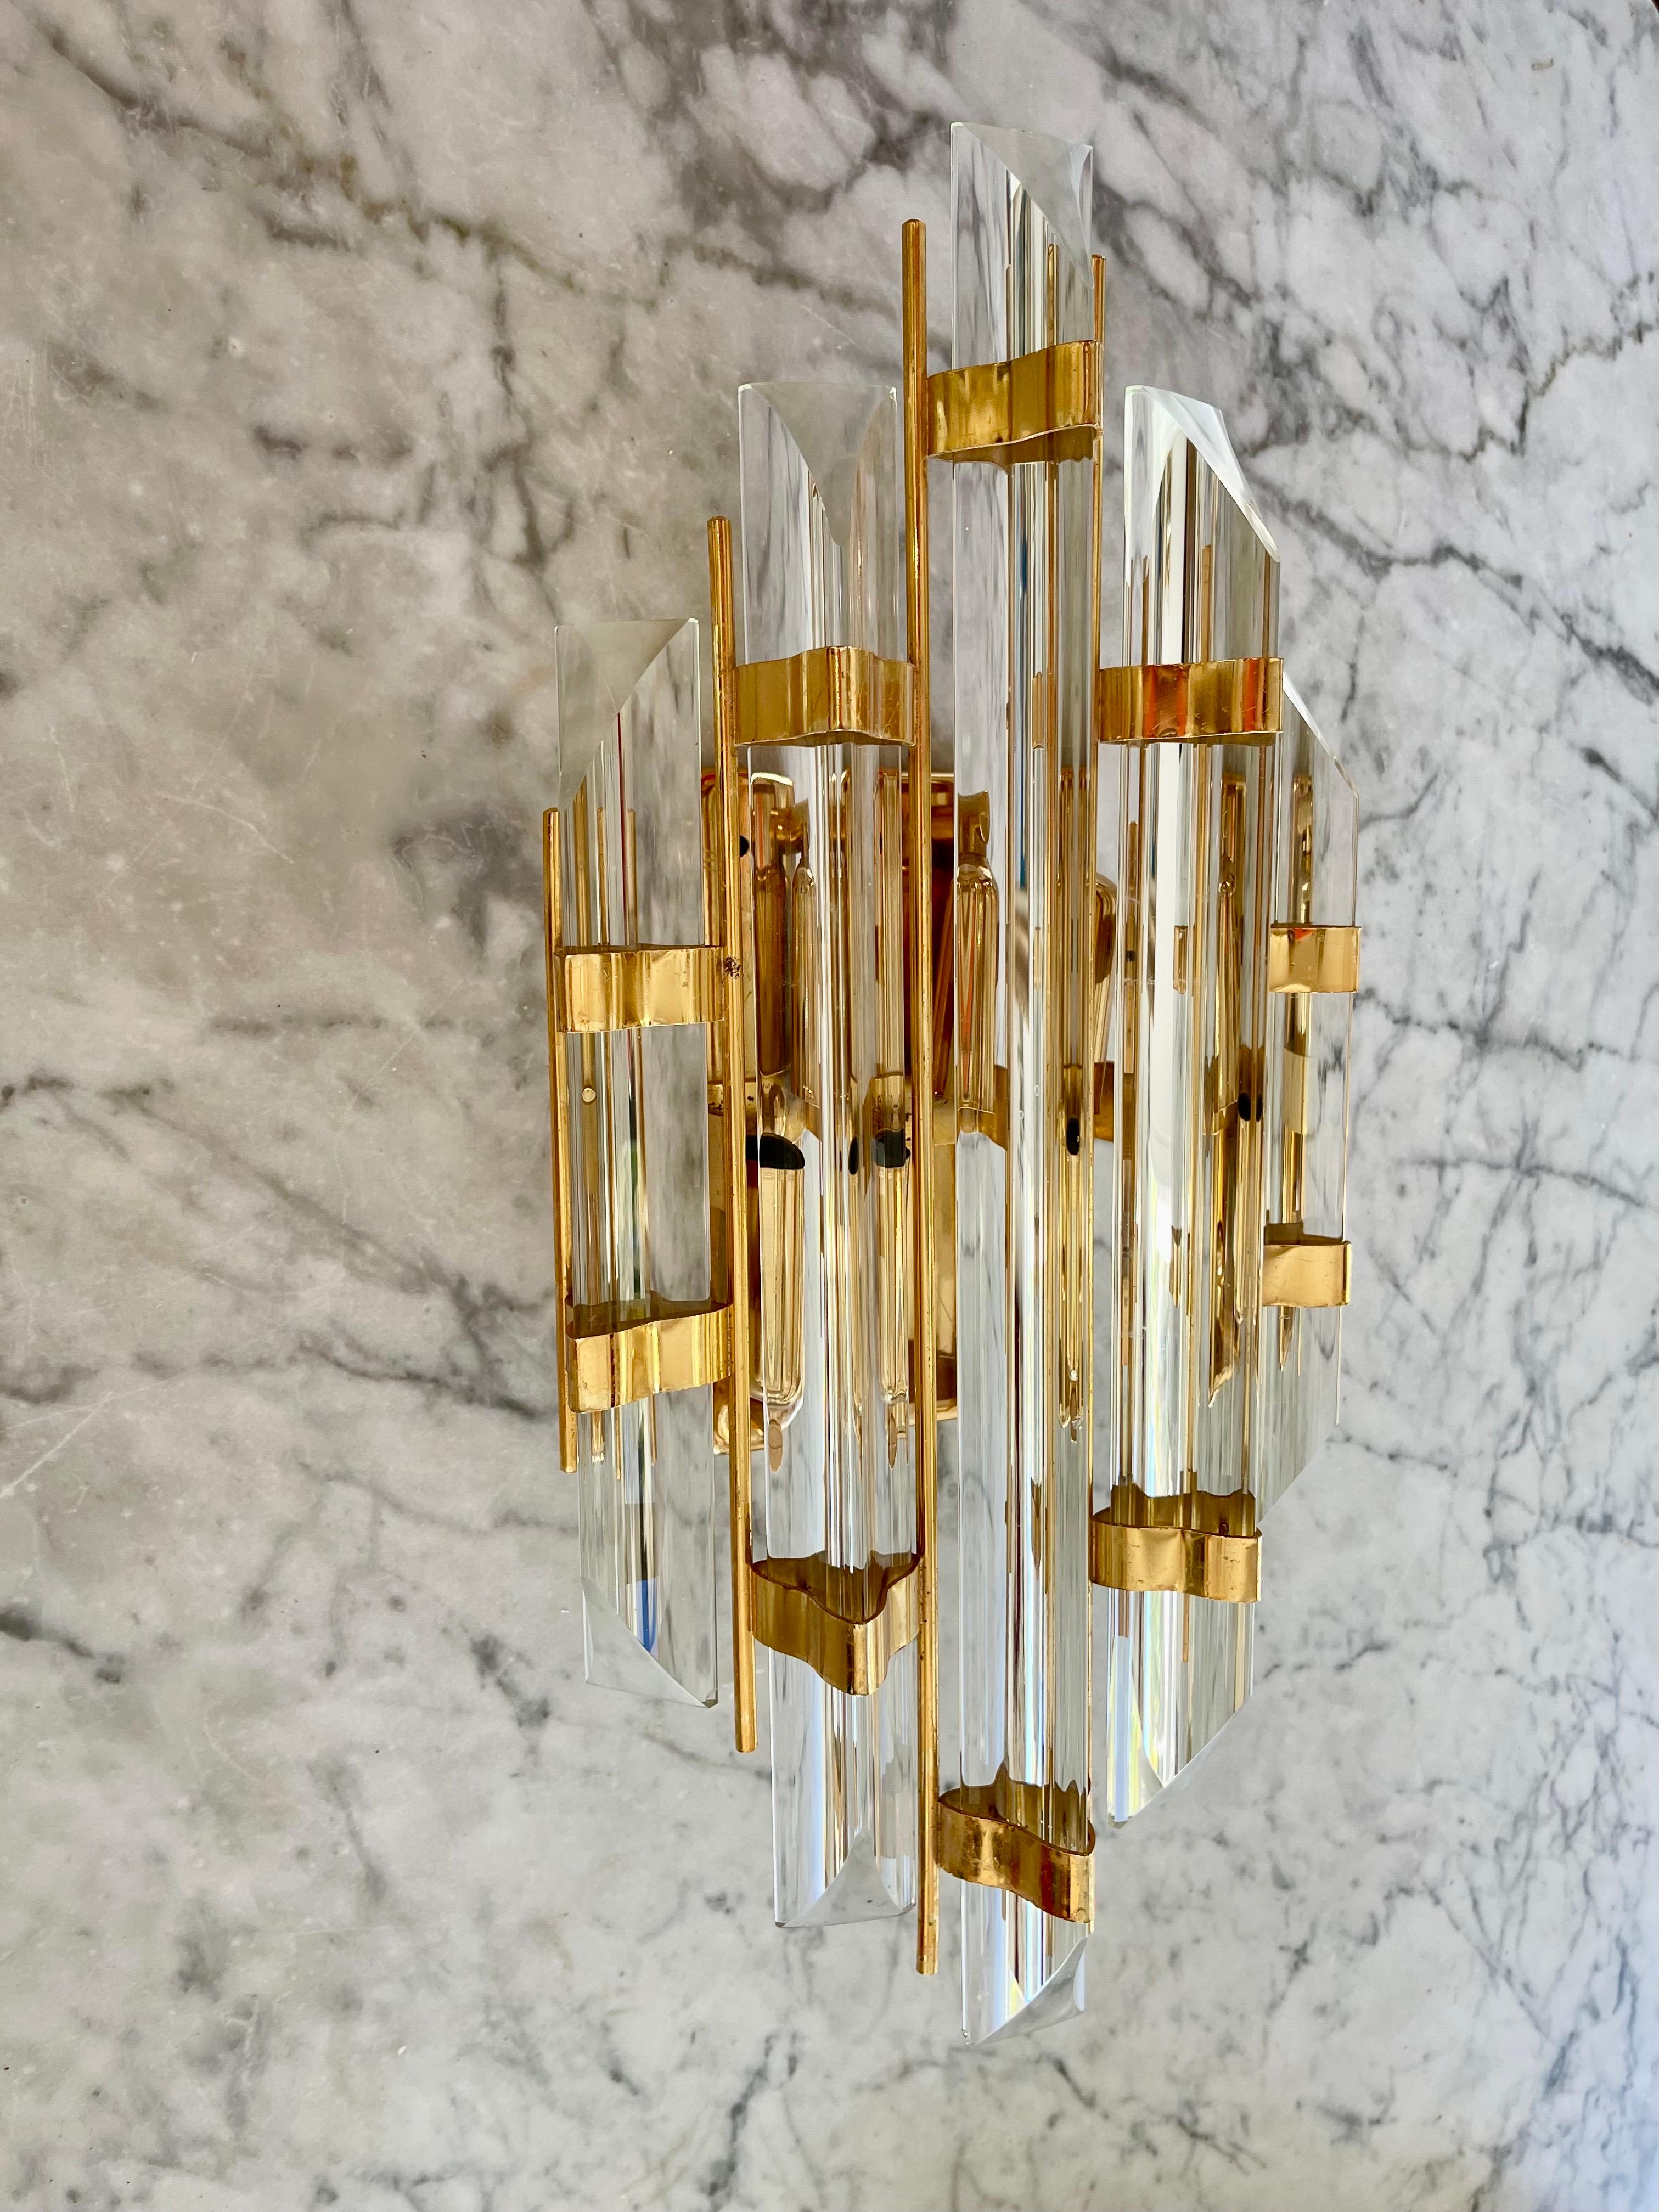 Venini wall lighting murano glass with in iridium glass. The design and the quality of the glass make this piece the best of the design.
This wall lighting pair are in good condition.

Please ask for Shipping Quote !
Venini is an Italian company